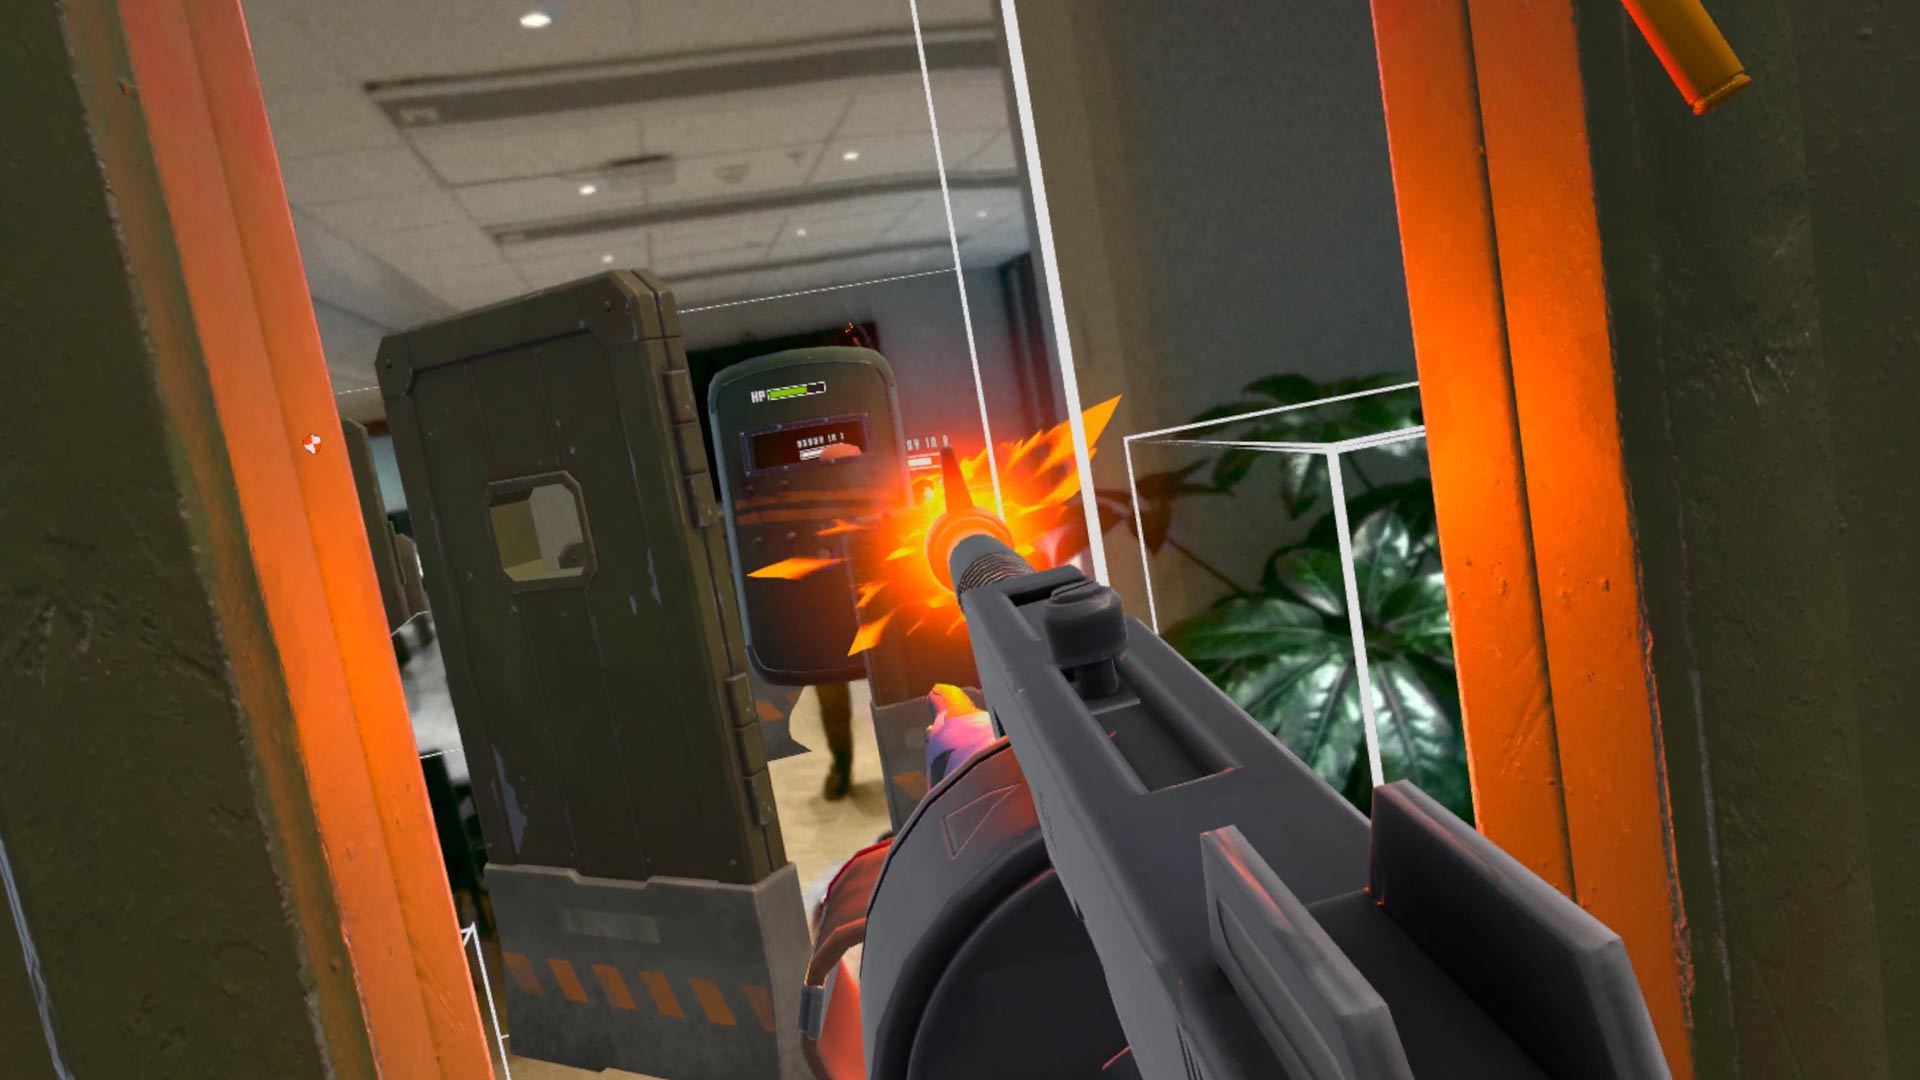 Hands-on: 'Spatial Ops' is an VR Shooter for Play, Open Beta Now Live – Road to VR